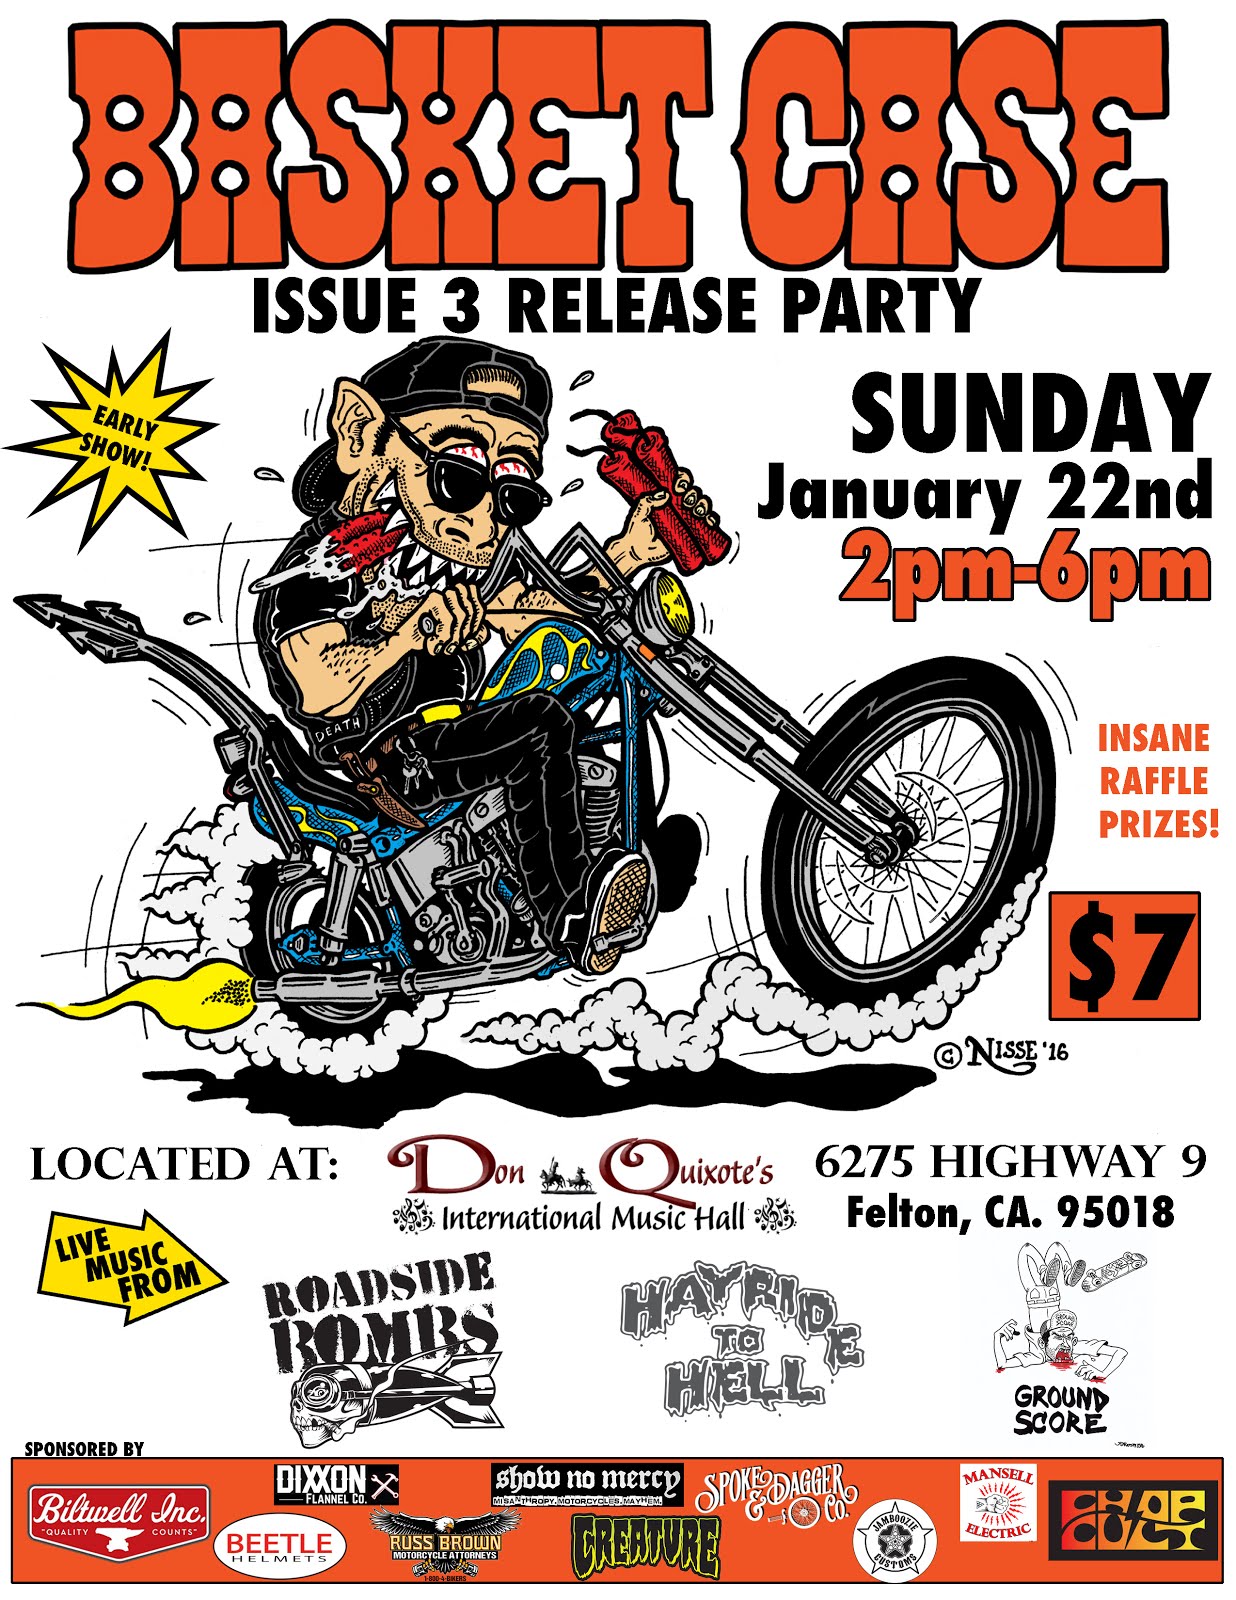 Issue release. Rat Fink Choppers poster. Raffle Prizes. Rat Fink Bicycle.